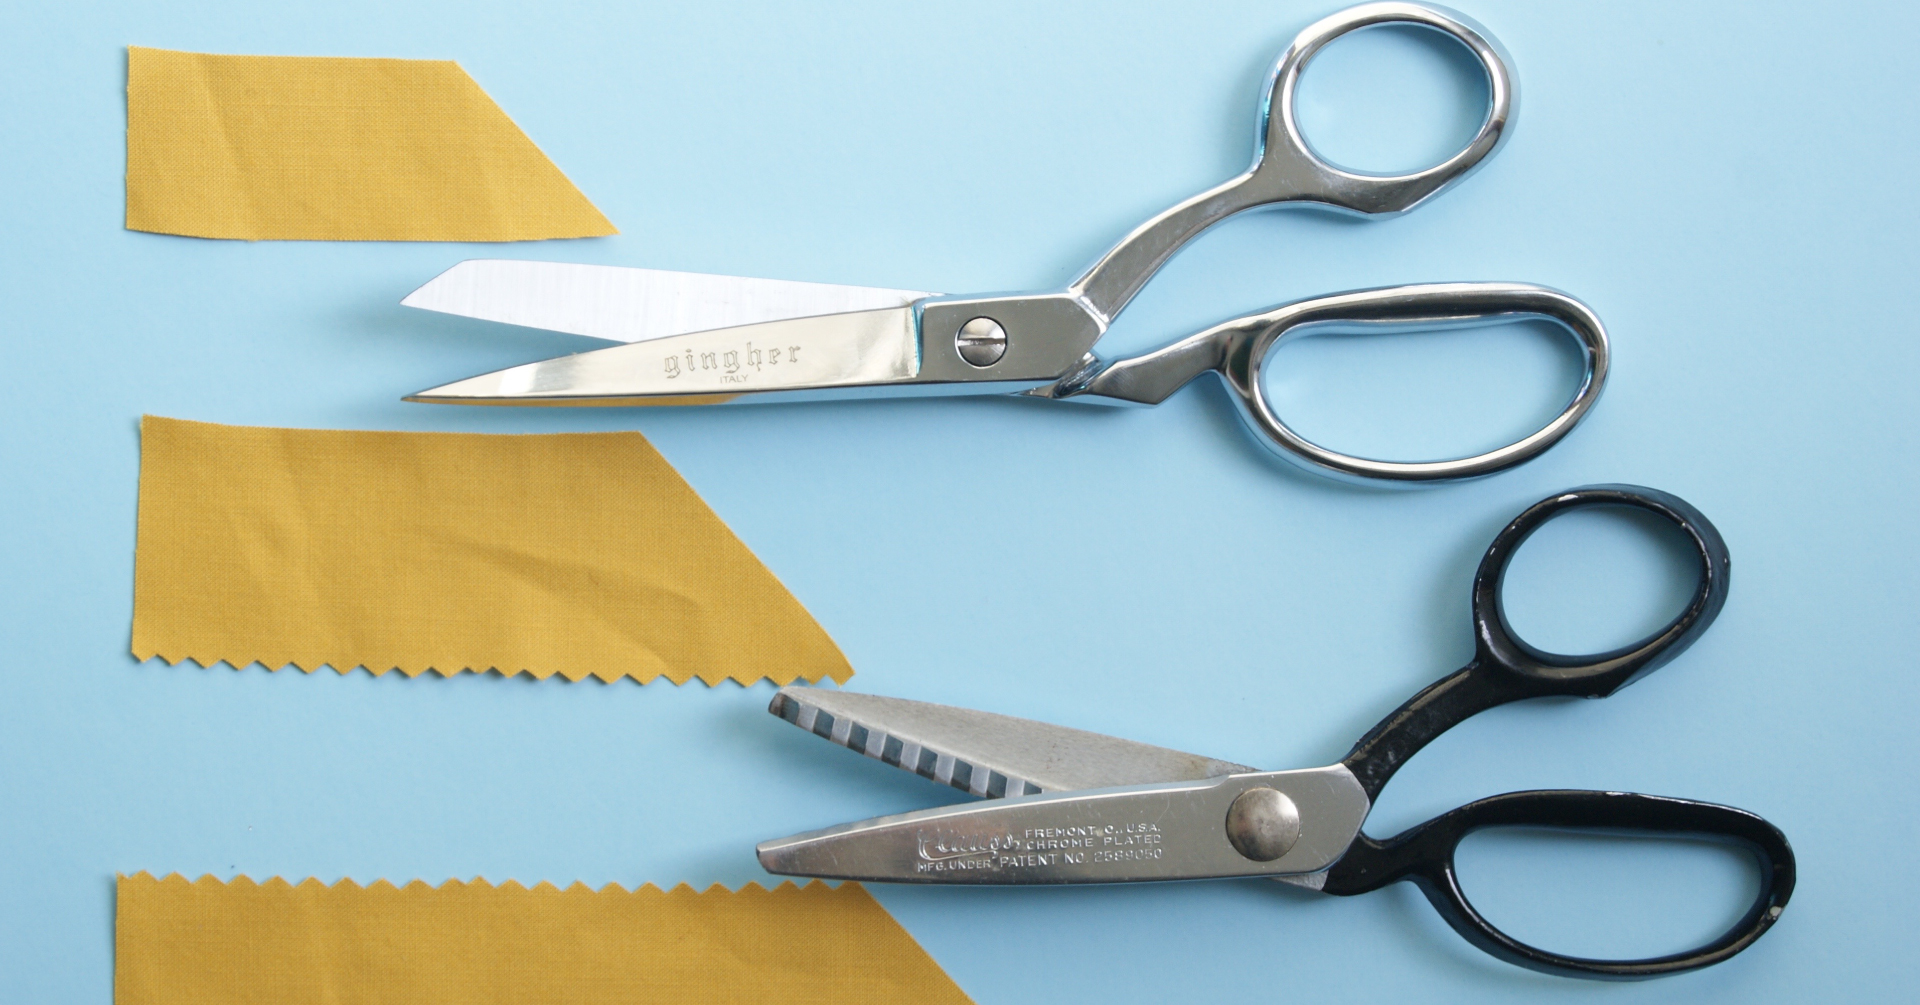 How to Select a Good Sewing Scissors for Cutting Fabric